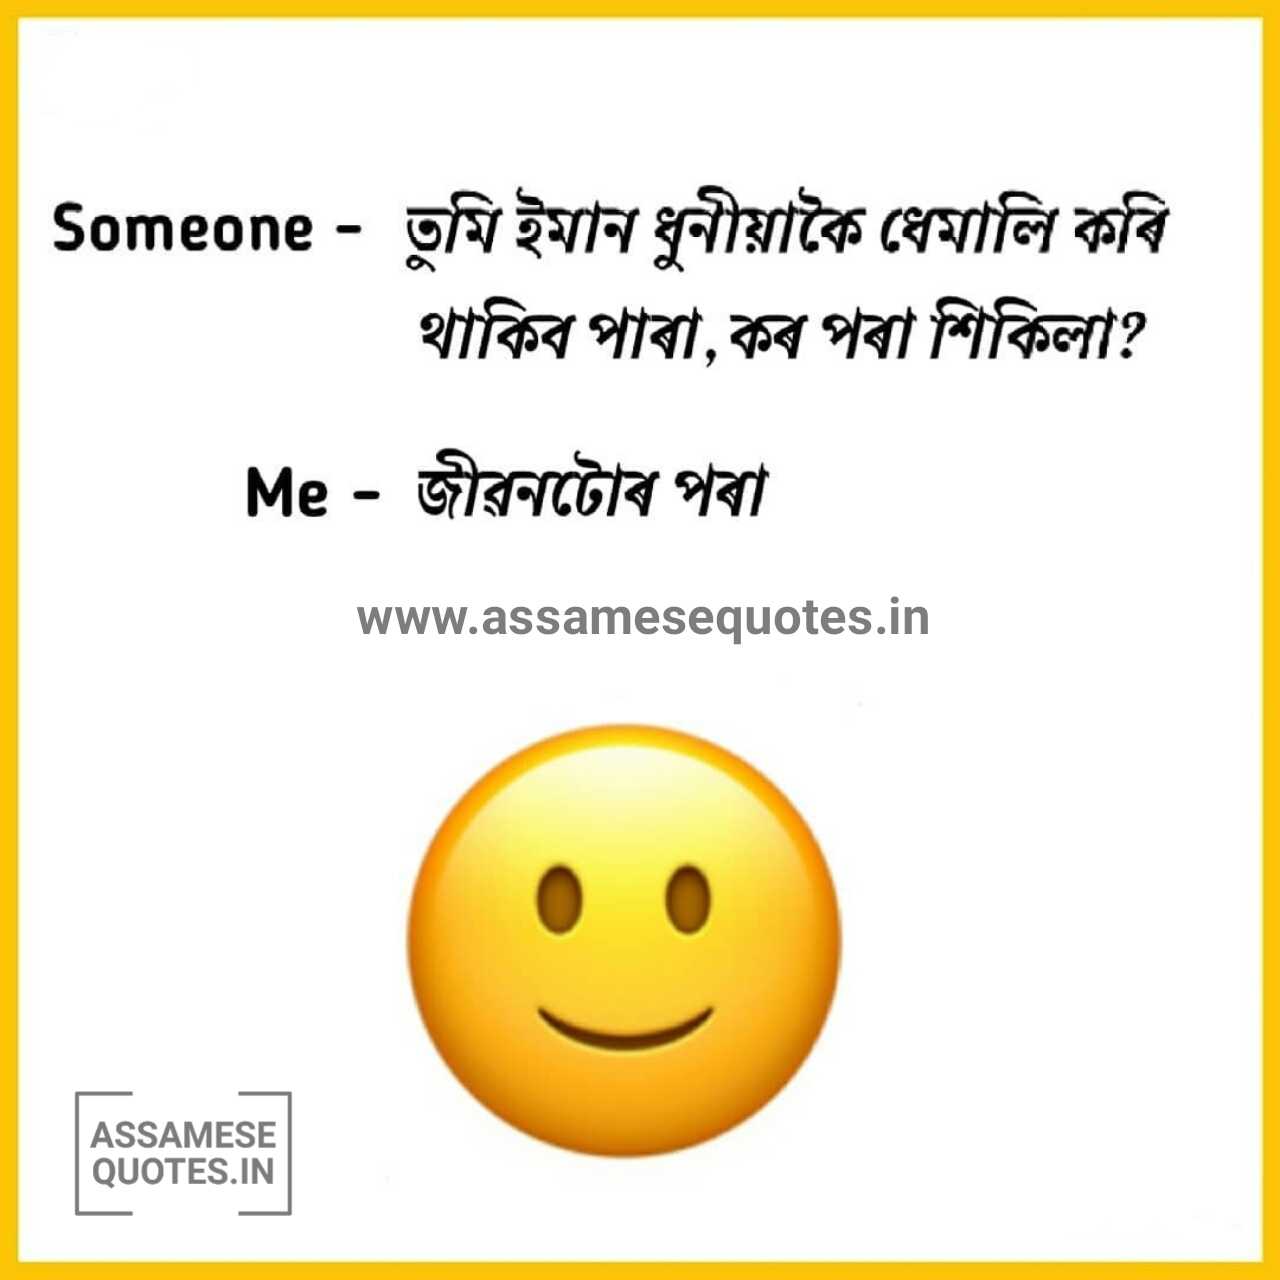 assamese quotes on life